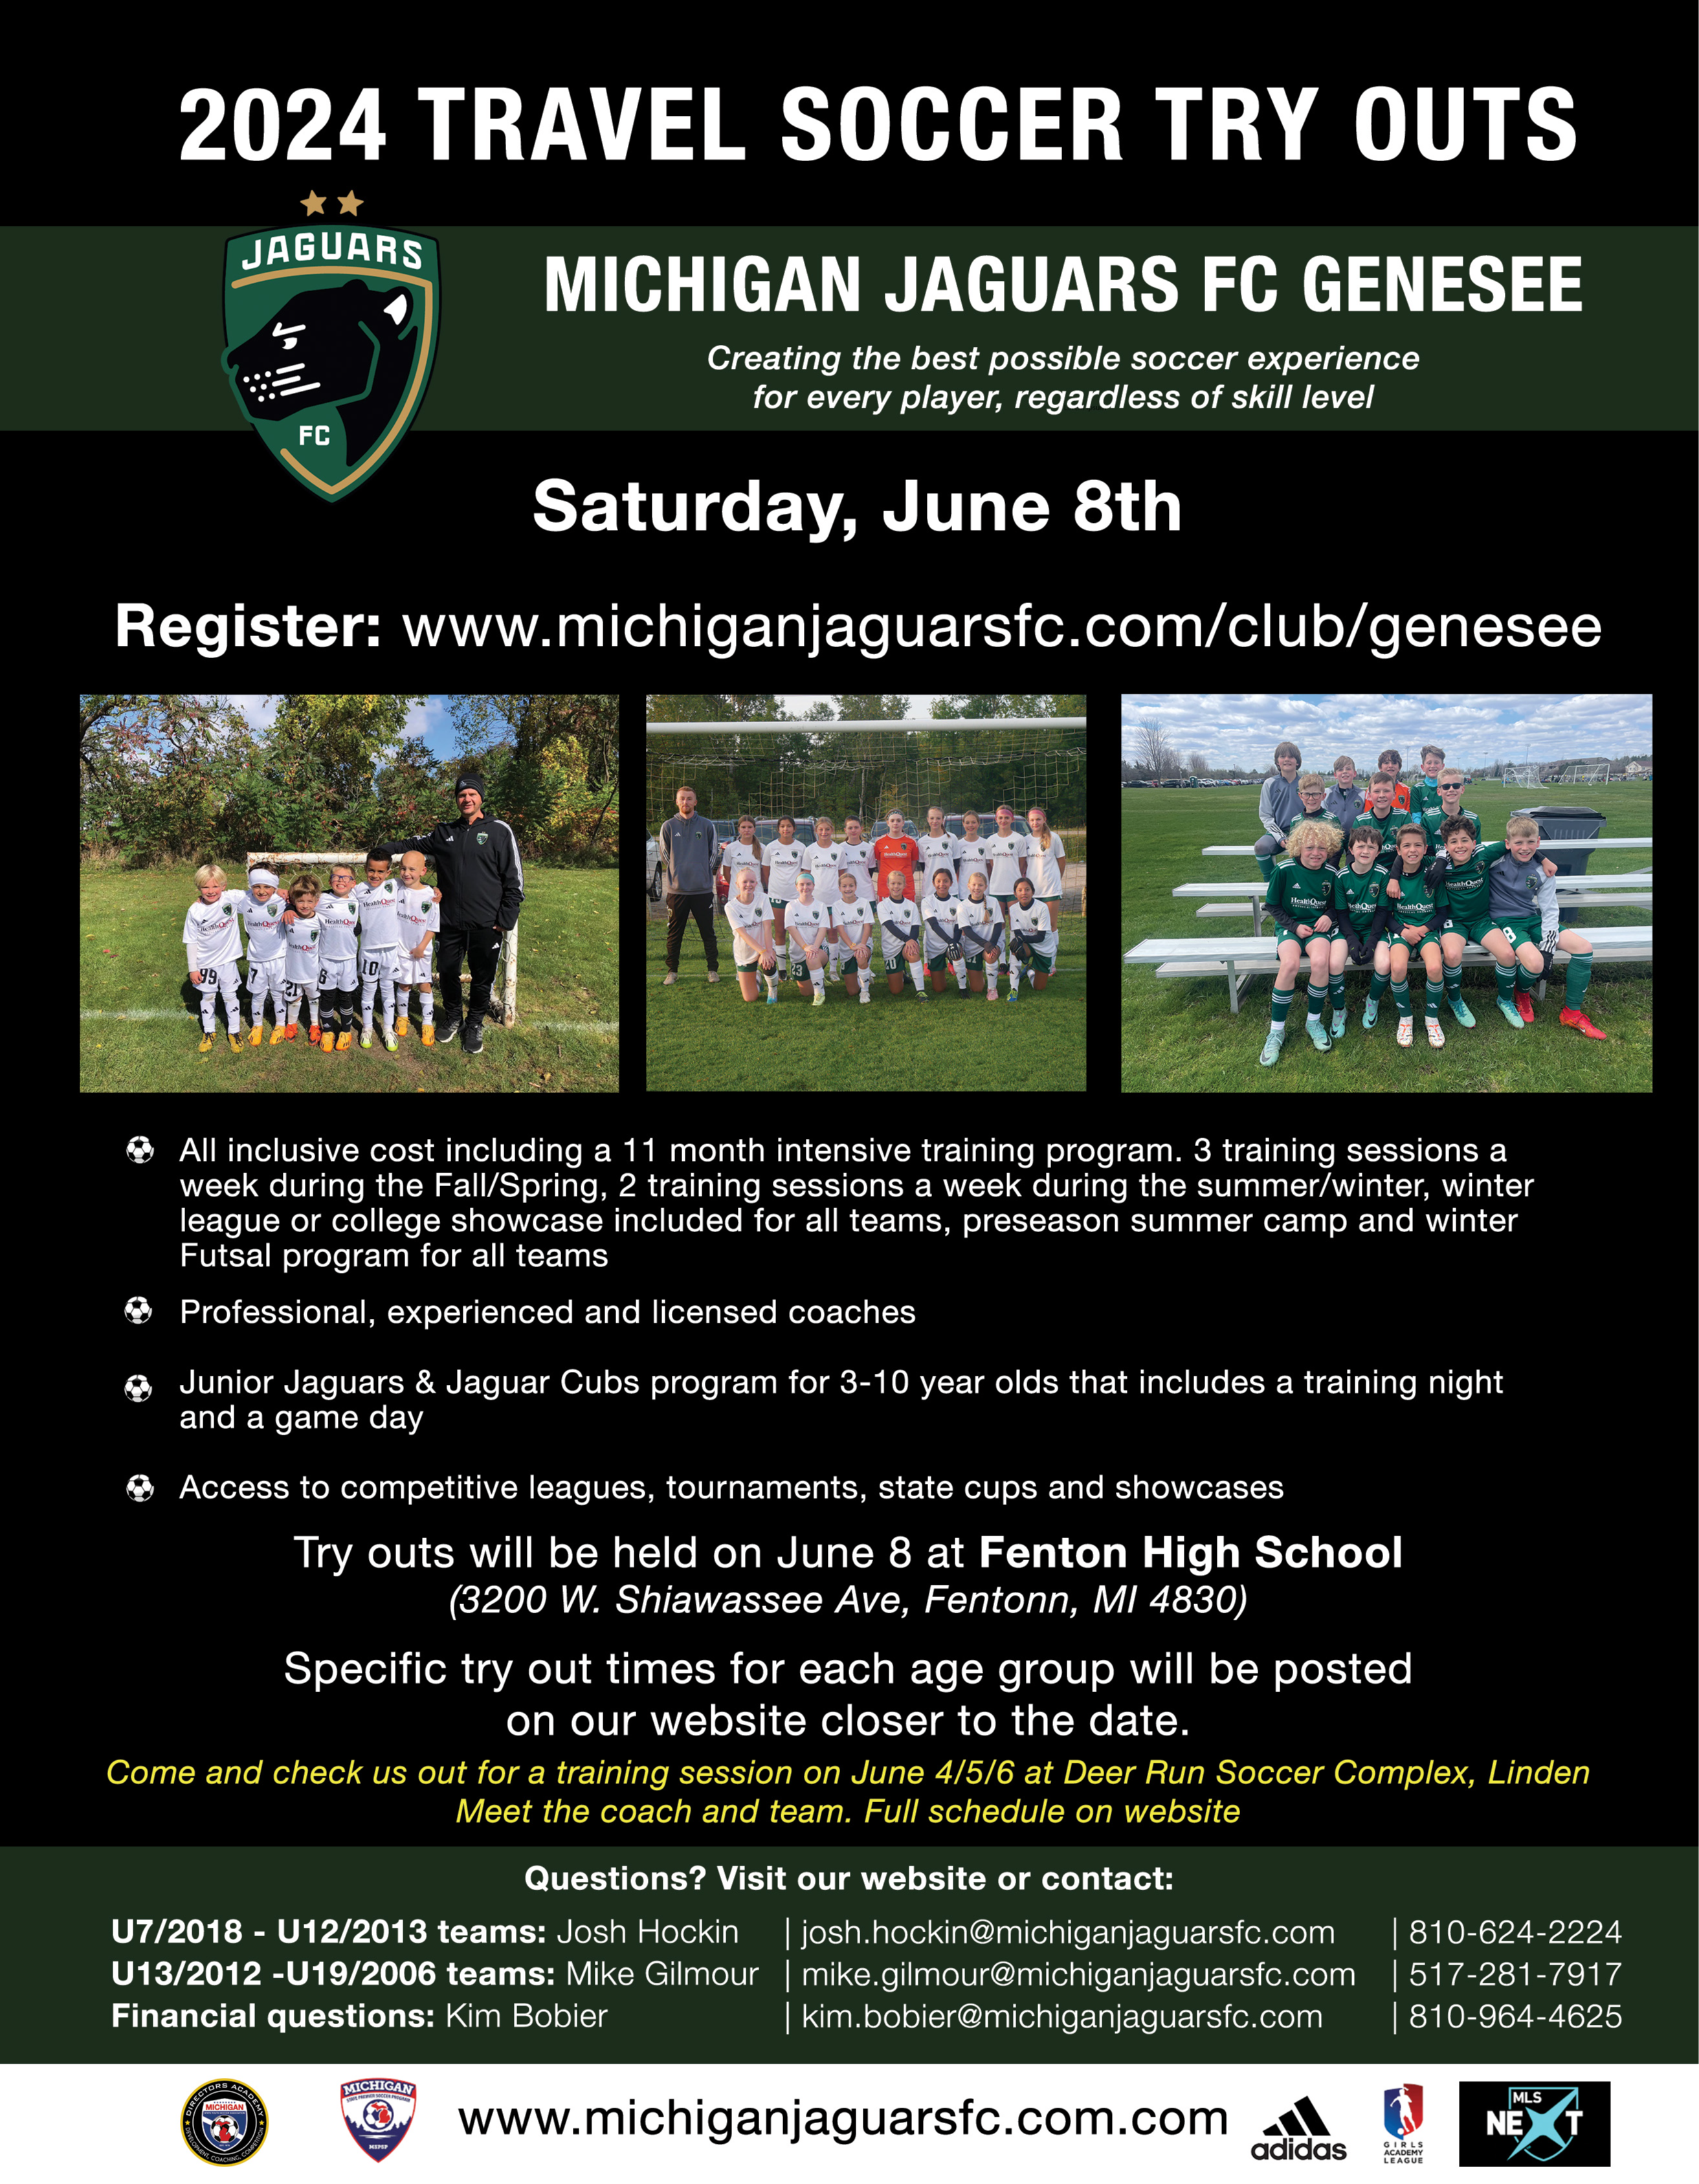 Michigan Jaguars FC Genesee  Travel Soccer Try Outs